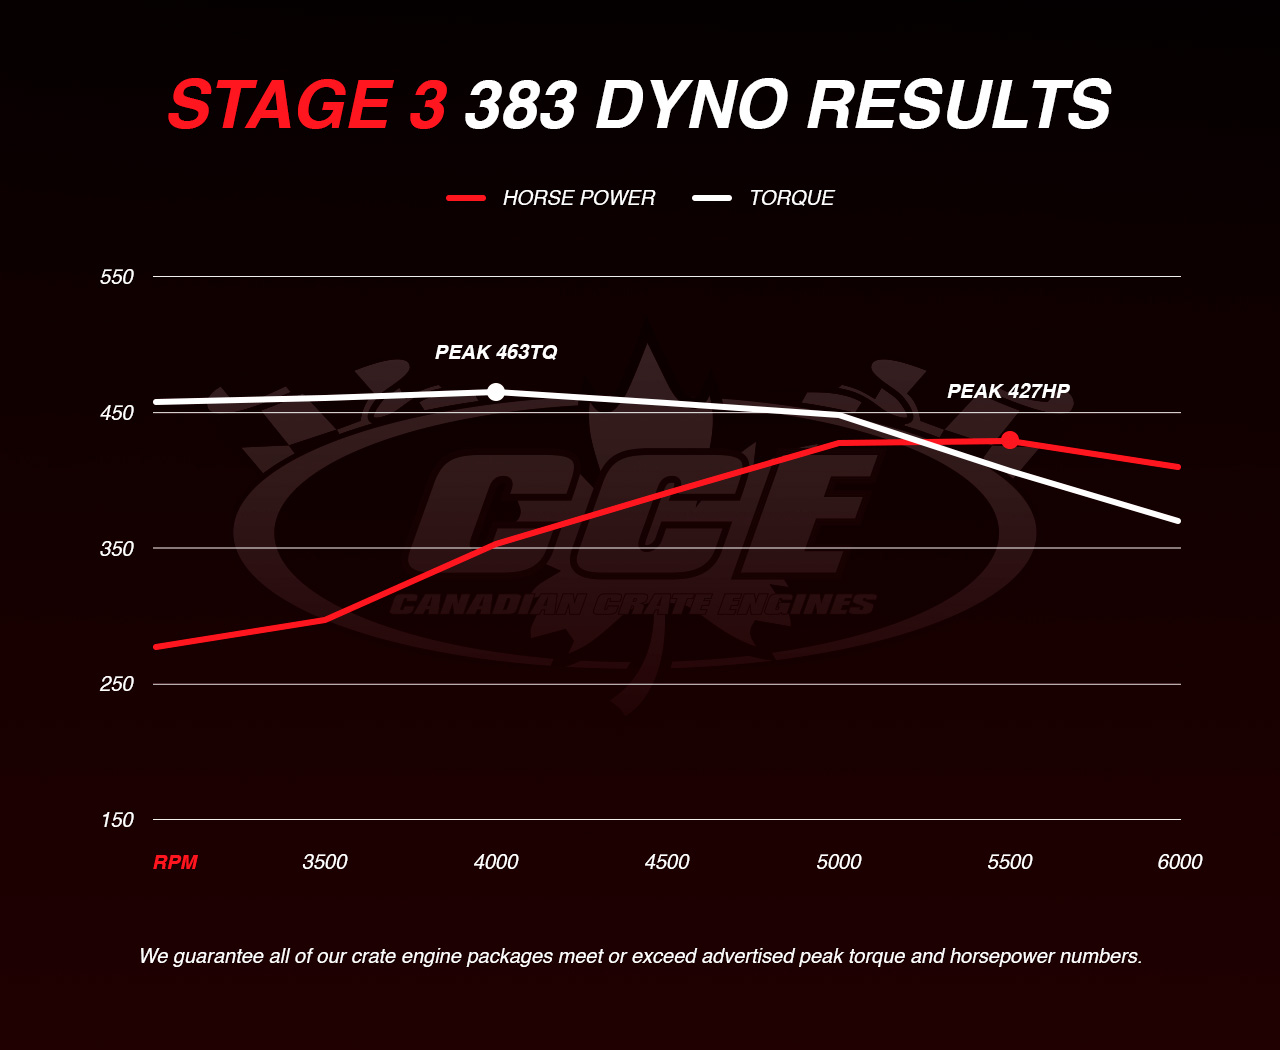 Dyno Graph Results for Chevy Stage 3 showing peak torque of 463TQ and peak horsepower of 427HP